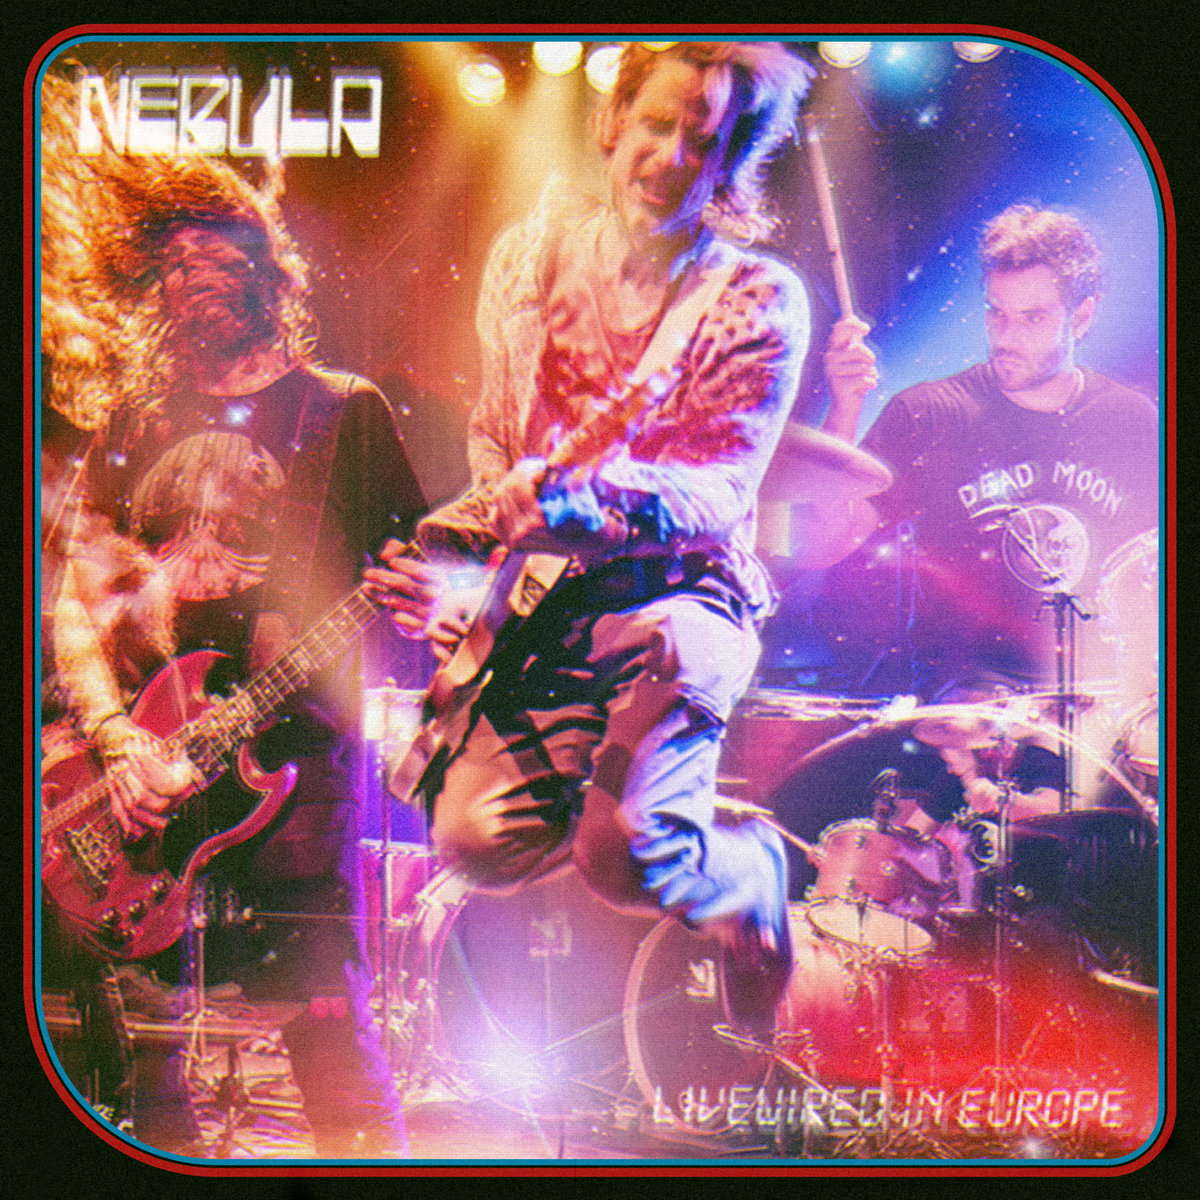 Happy #Saturday! New Rapid Fire Review on the blog feat. NEBULA's upcoming live LP: harbingerofdoom1.blogspot.com Like/follow/repost if you dig what you read & pre-order the LP to support the band. #HeavyPsych #DesertRock #StonerRock #Sleep #StonerFam #MetalTwitter #NowPlaying #Weekend